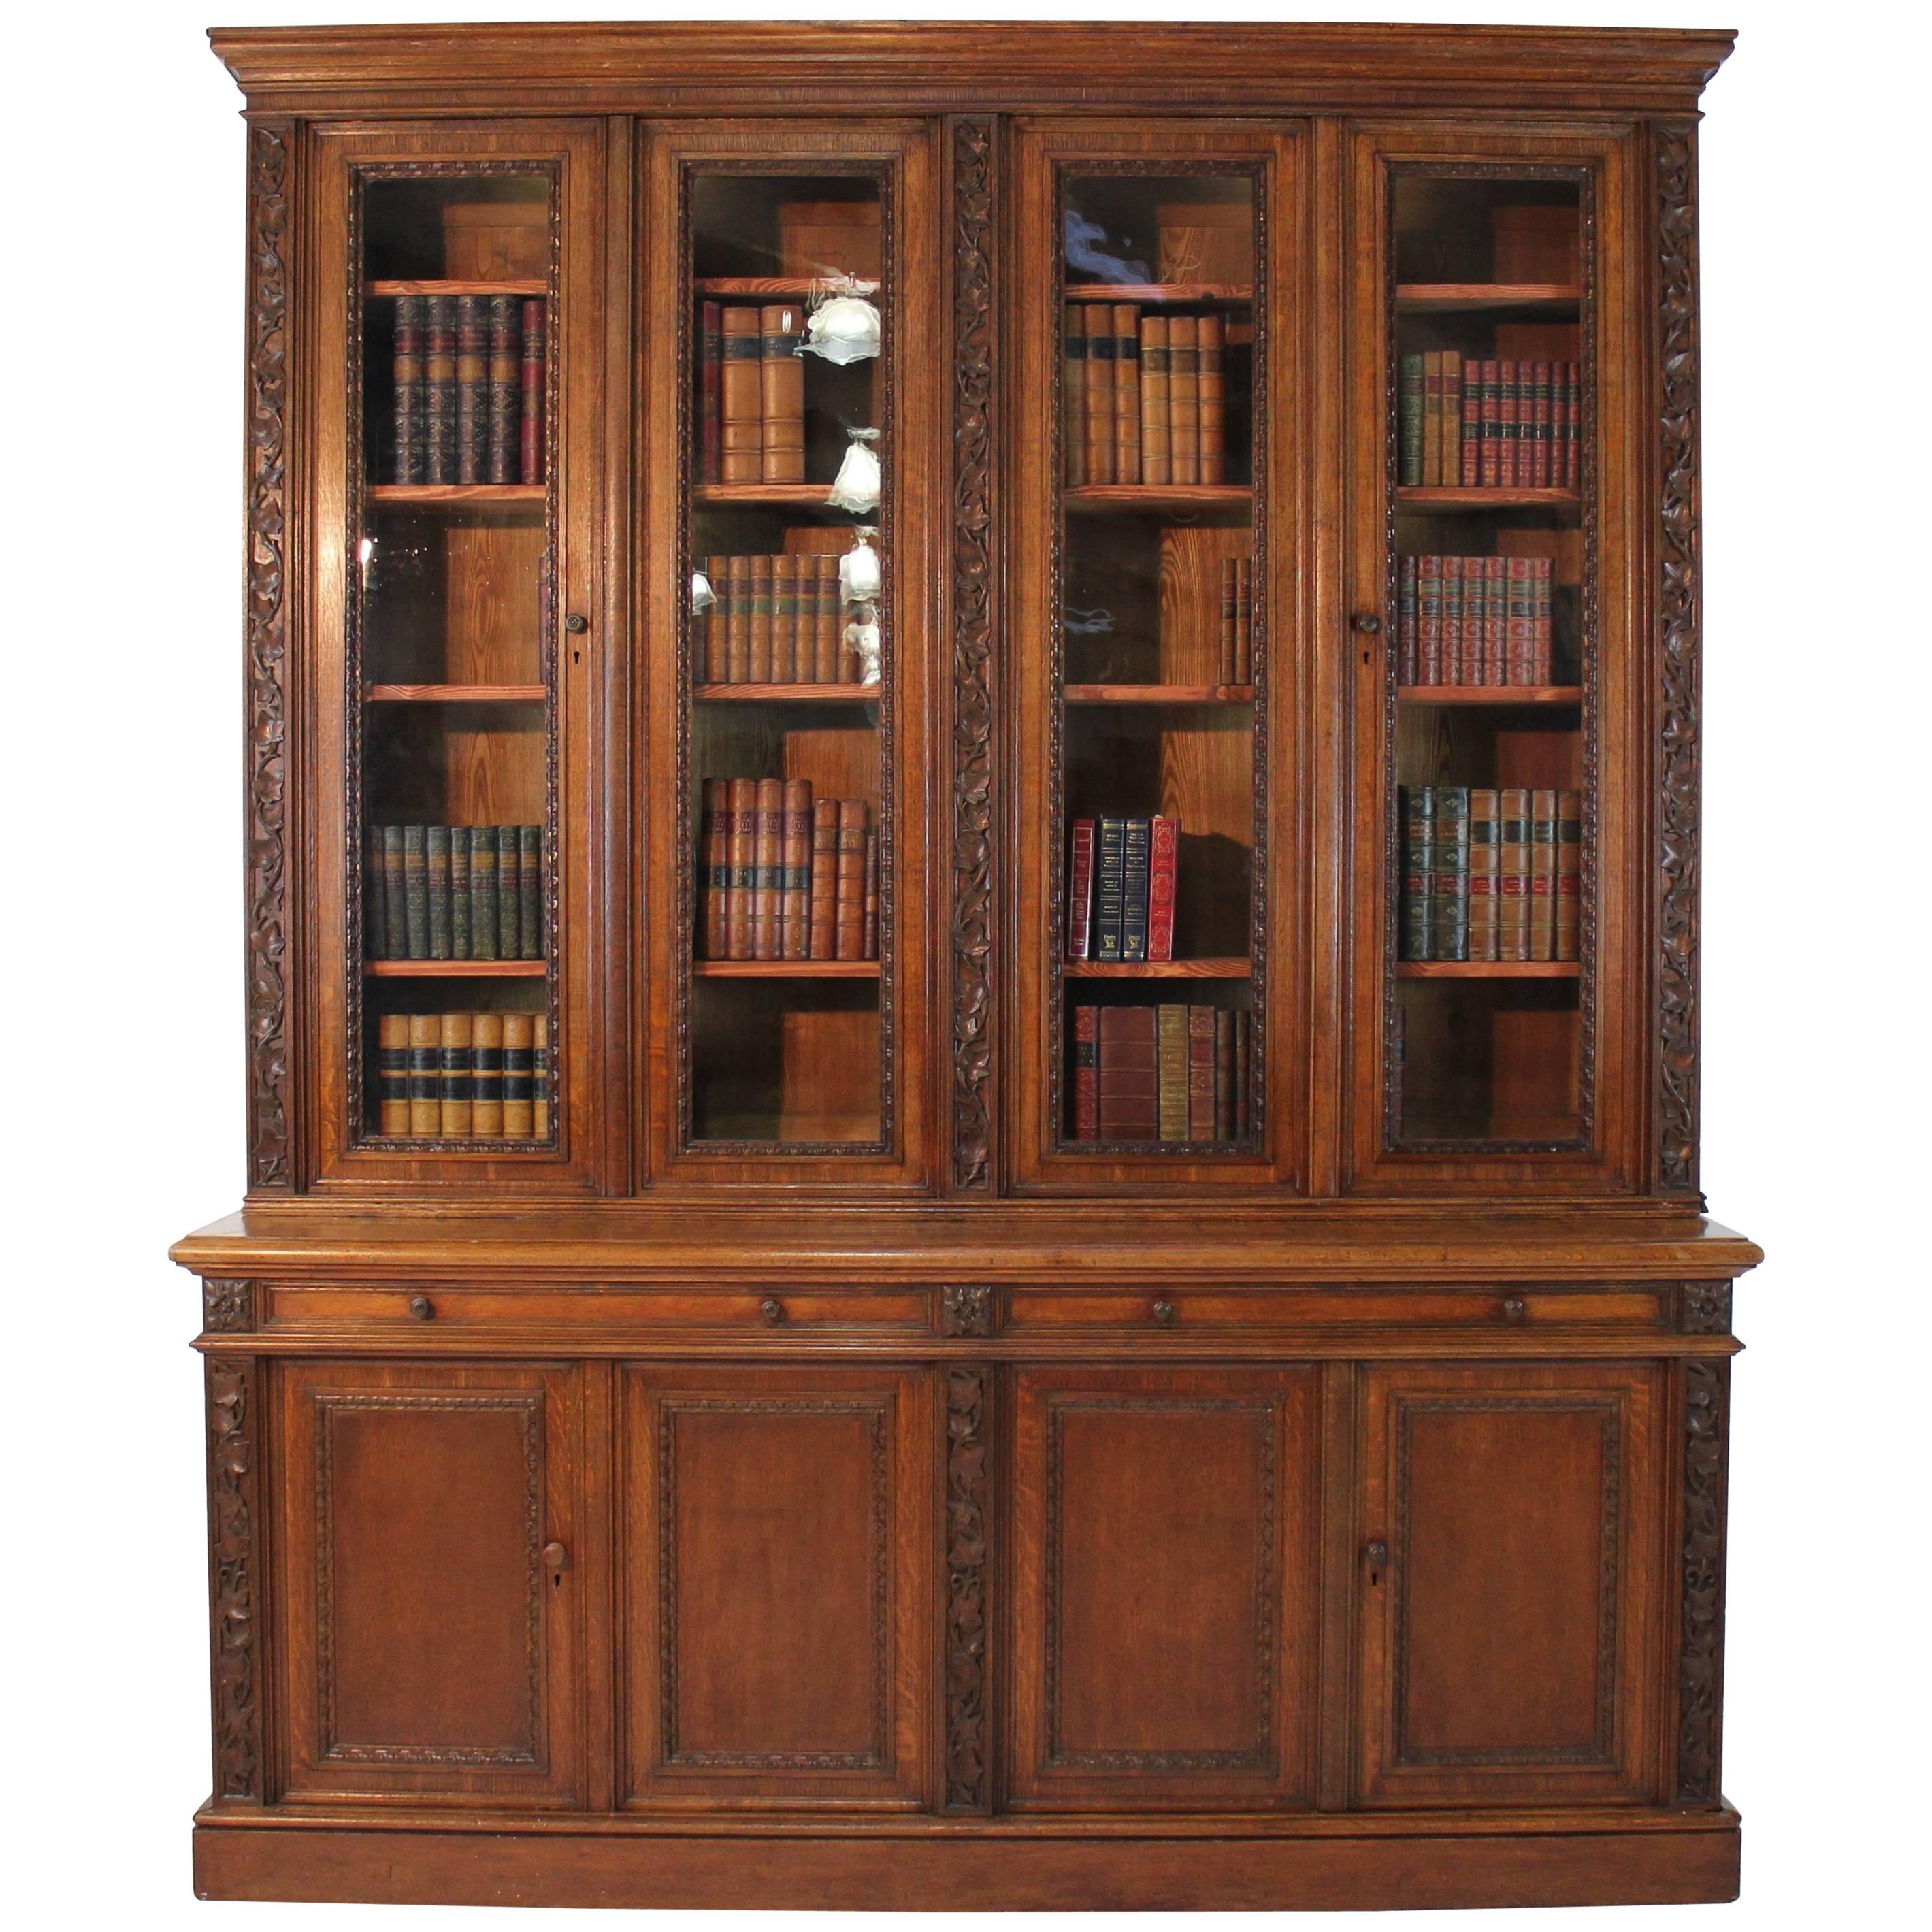 Victorian Ivy Leaf Carved Oak Library Bookcase, English, 19th Century